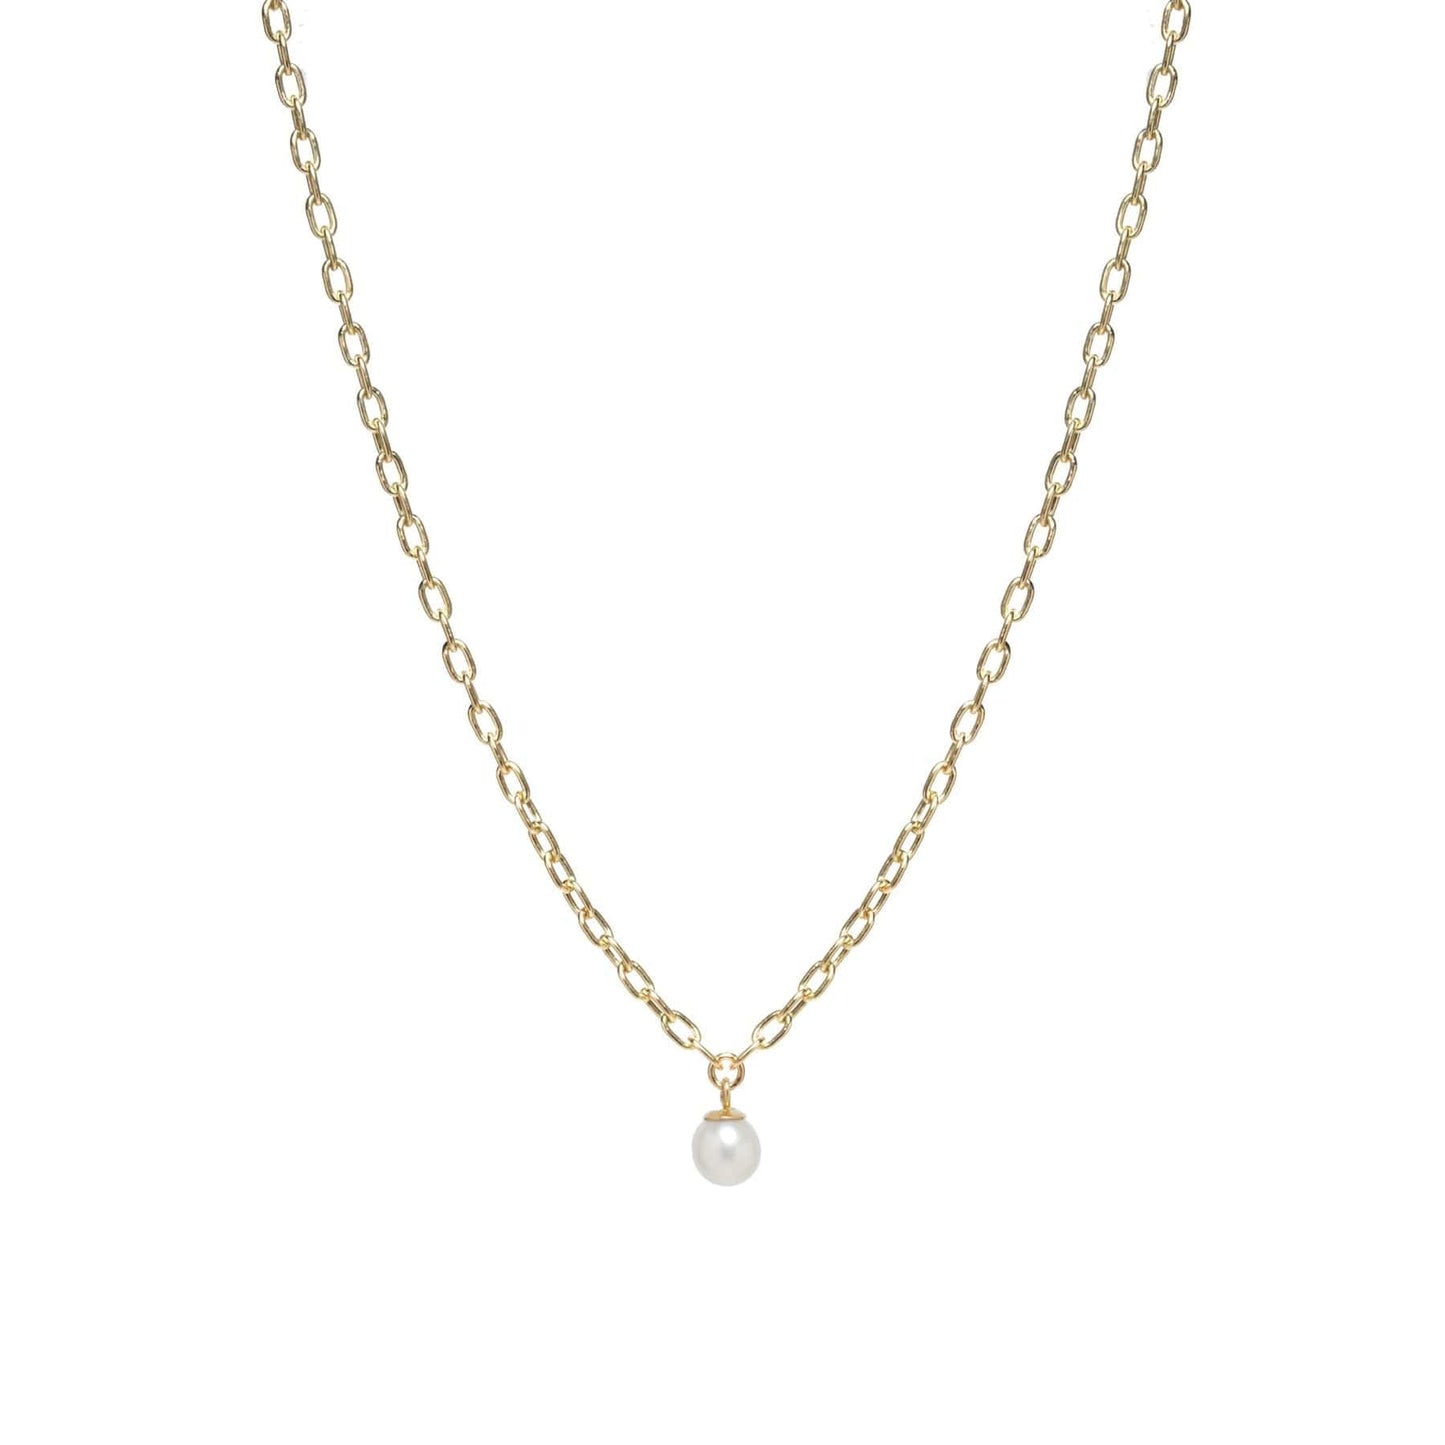 NKL-14K 14k Small Square Oval Link Dangling Pearl Necklace